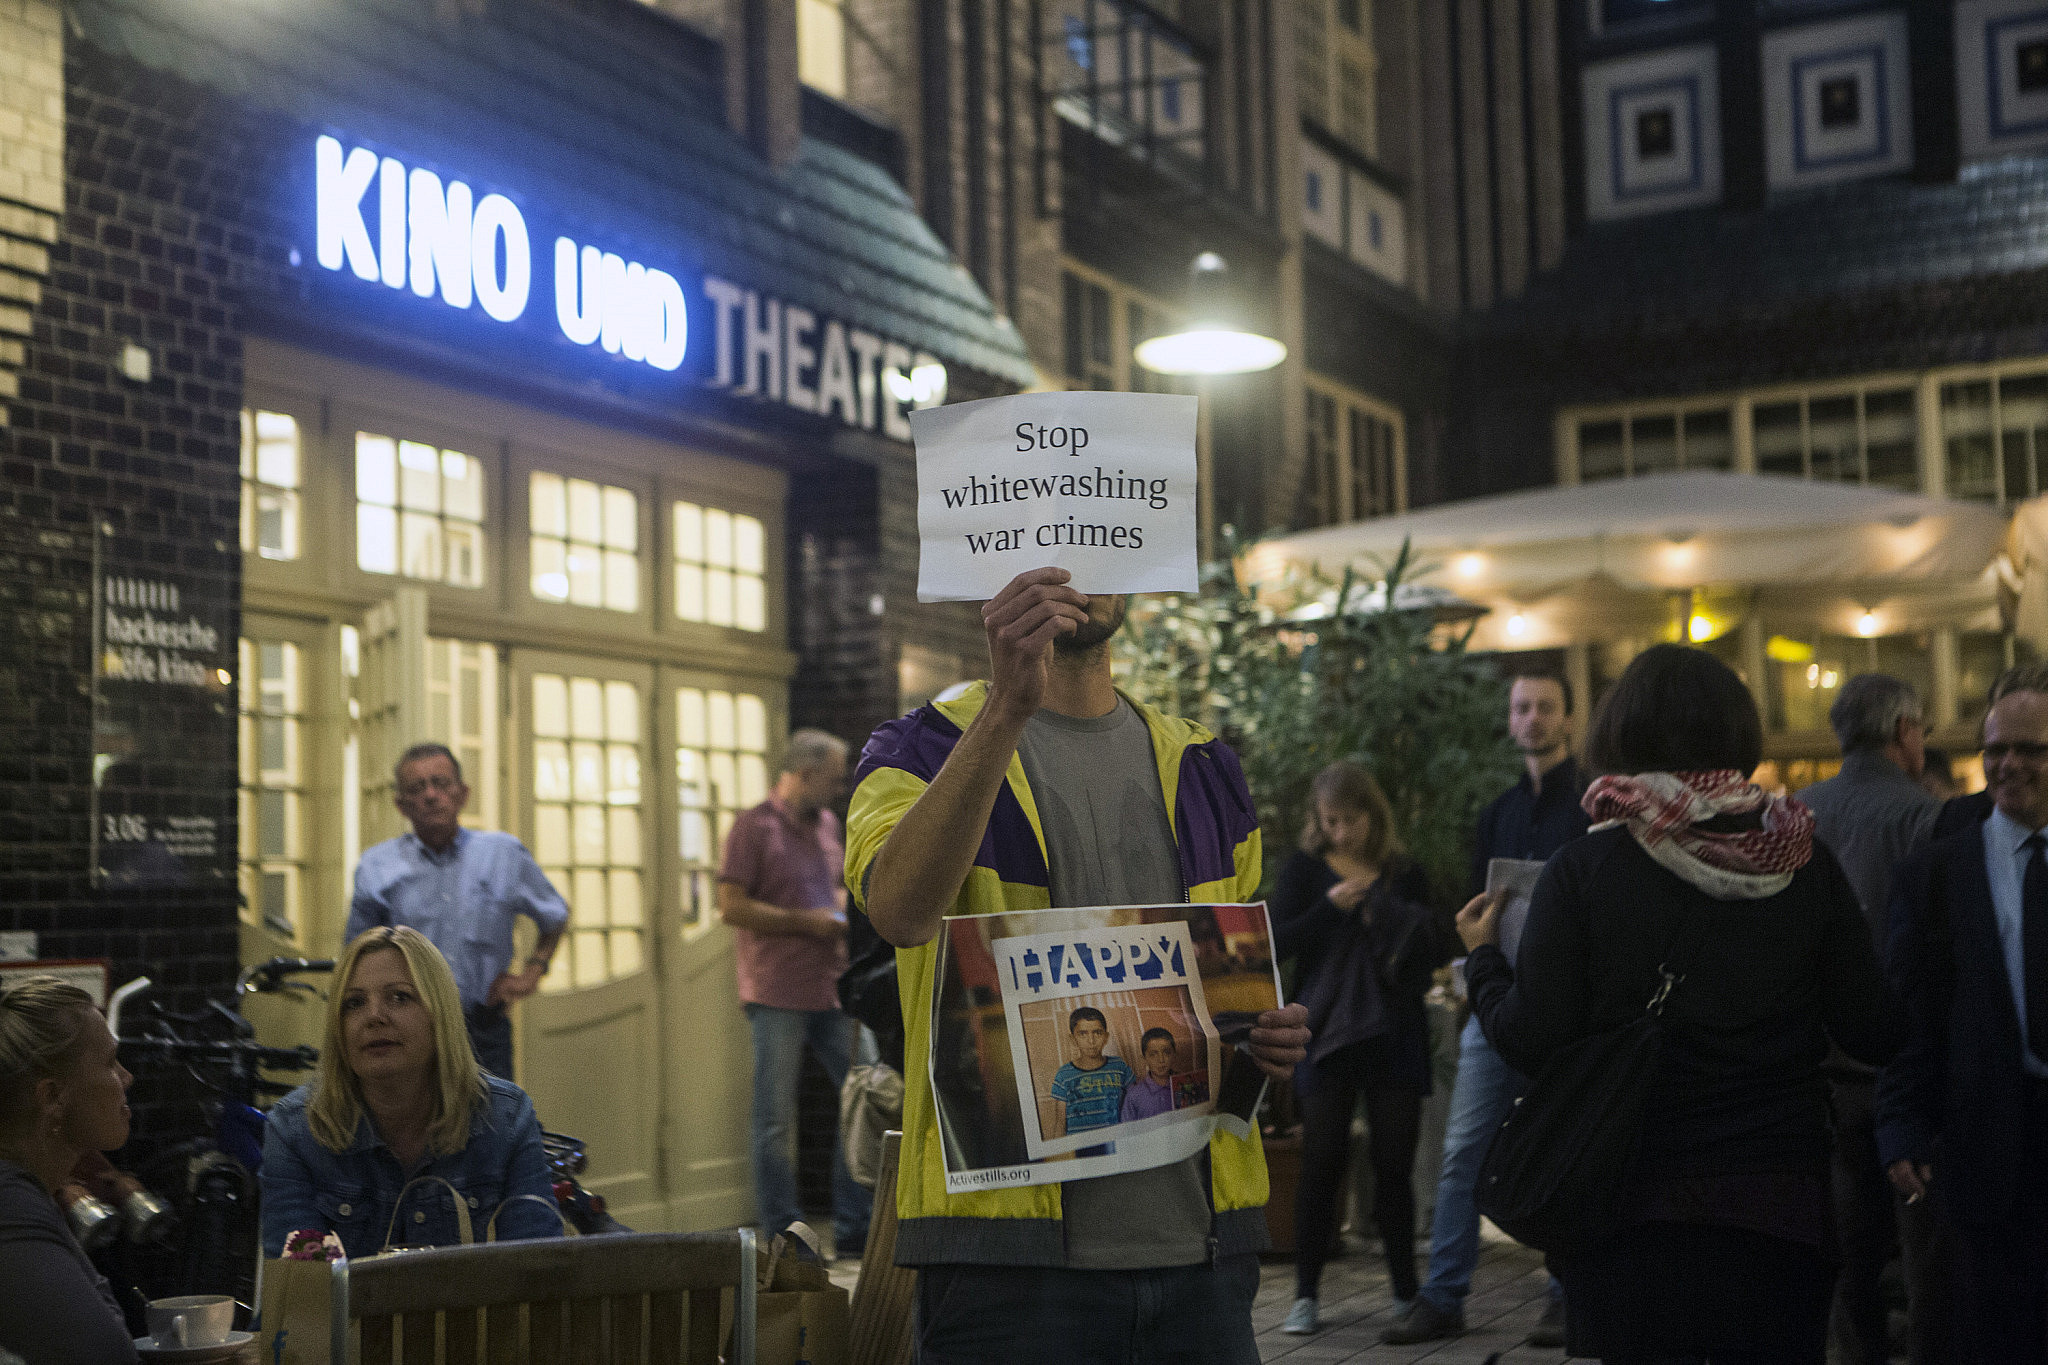 Activists hold a protest vigil in front of the Hackesche Höfe cinema for the opening of the 'Seret International' Israeli film festival, in Berlin, Germany, September 17, 2016. The activists held photos of families killed in Gaza and signs reading "culture can't hide massacres" and "stop whitewashing war crimes." (Anne Paq/Activestills)